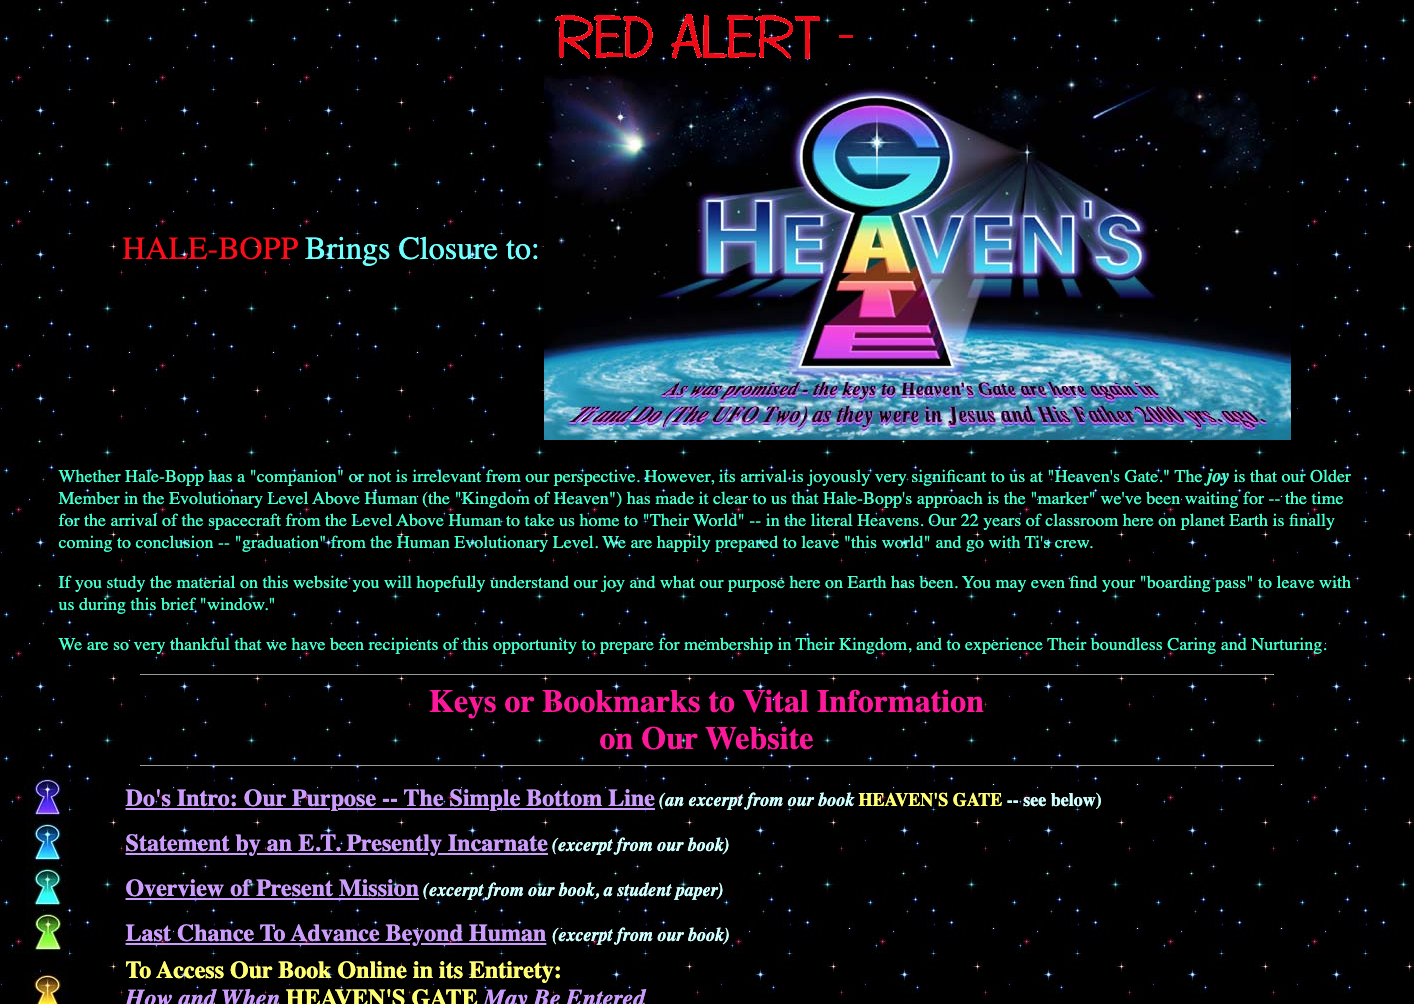 The image is a screenshot of the Heaven&#x27;s Gate cult website with various text and their logo